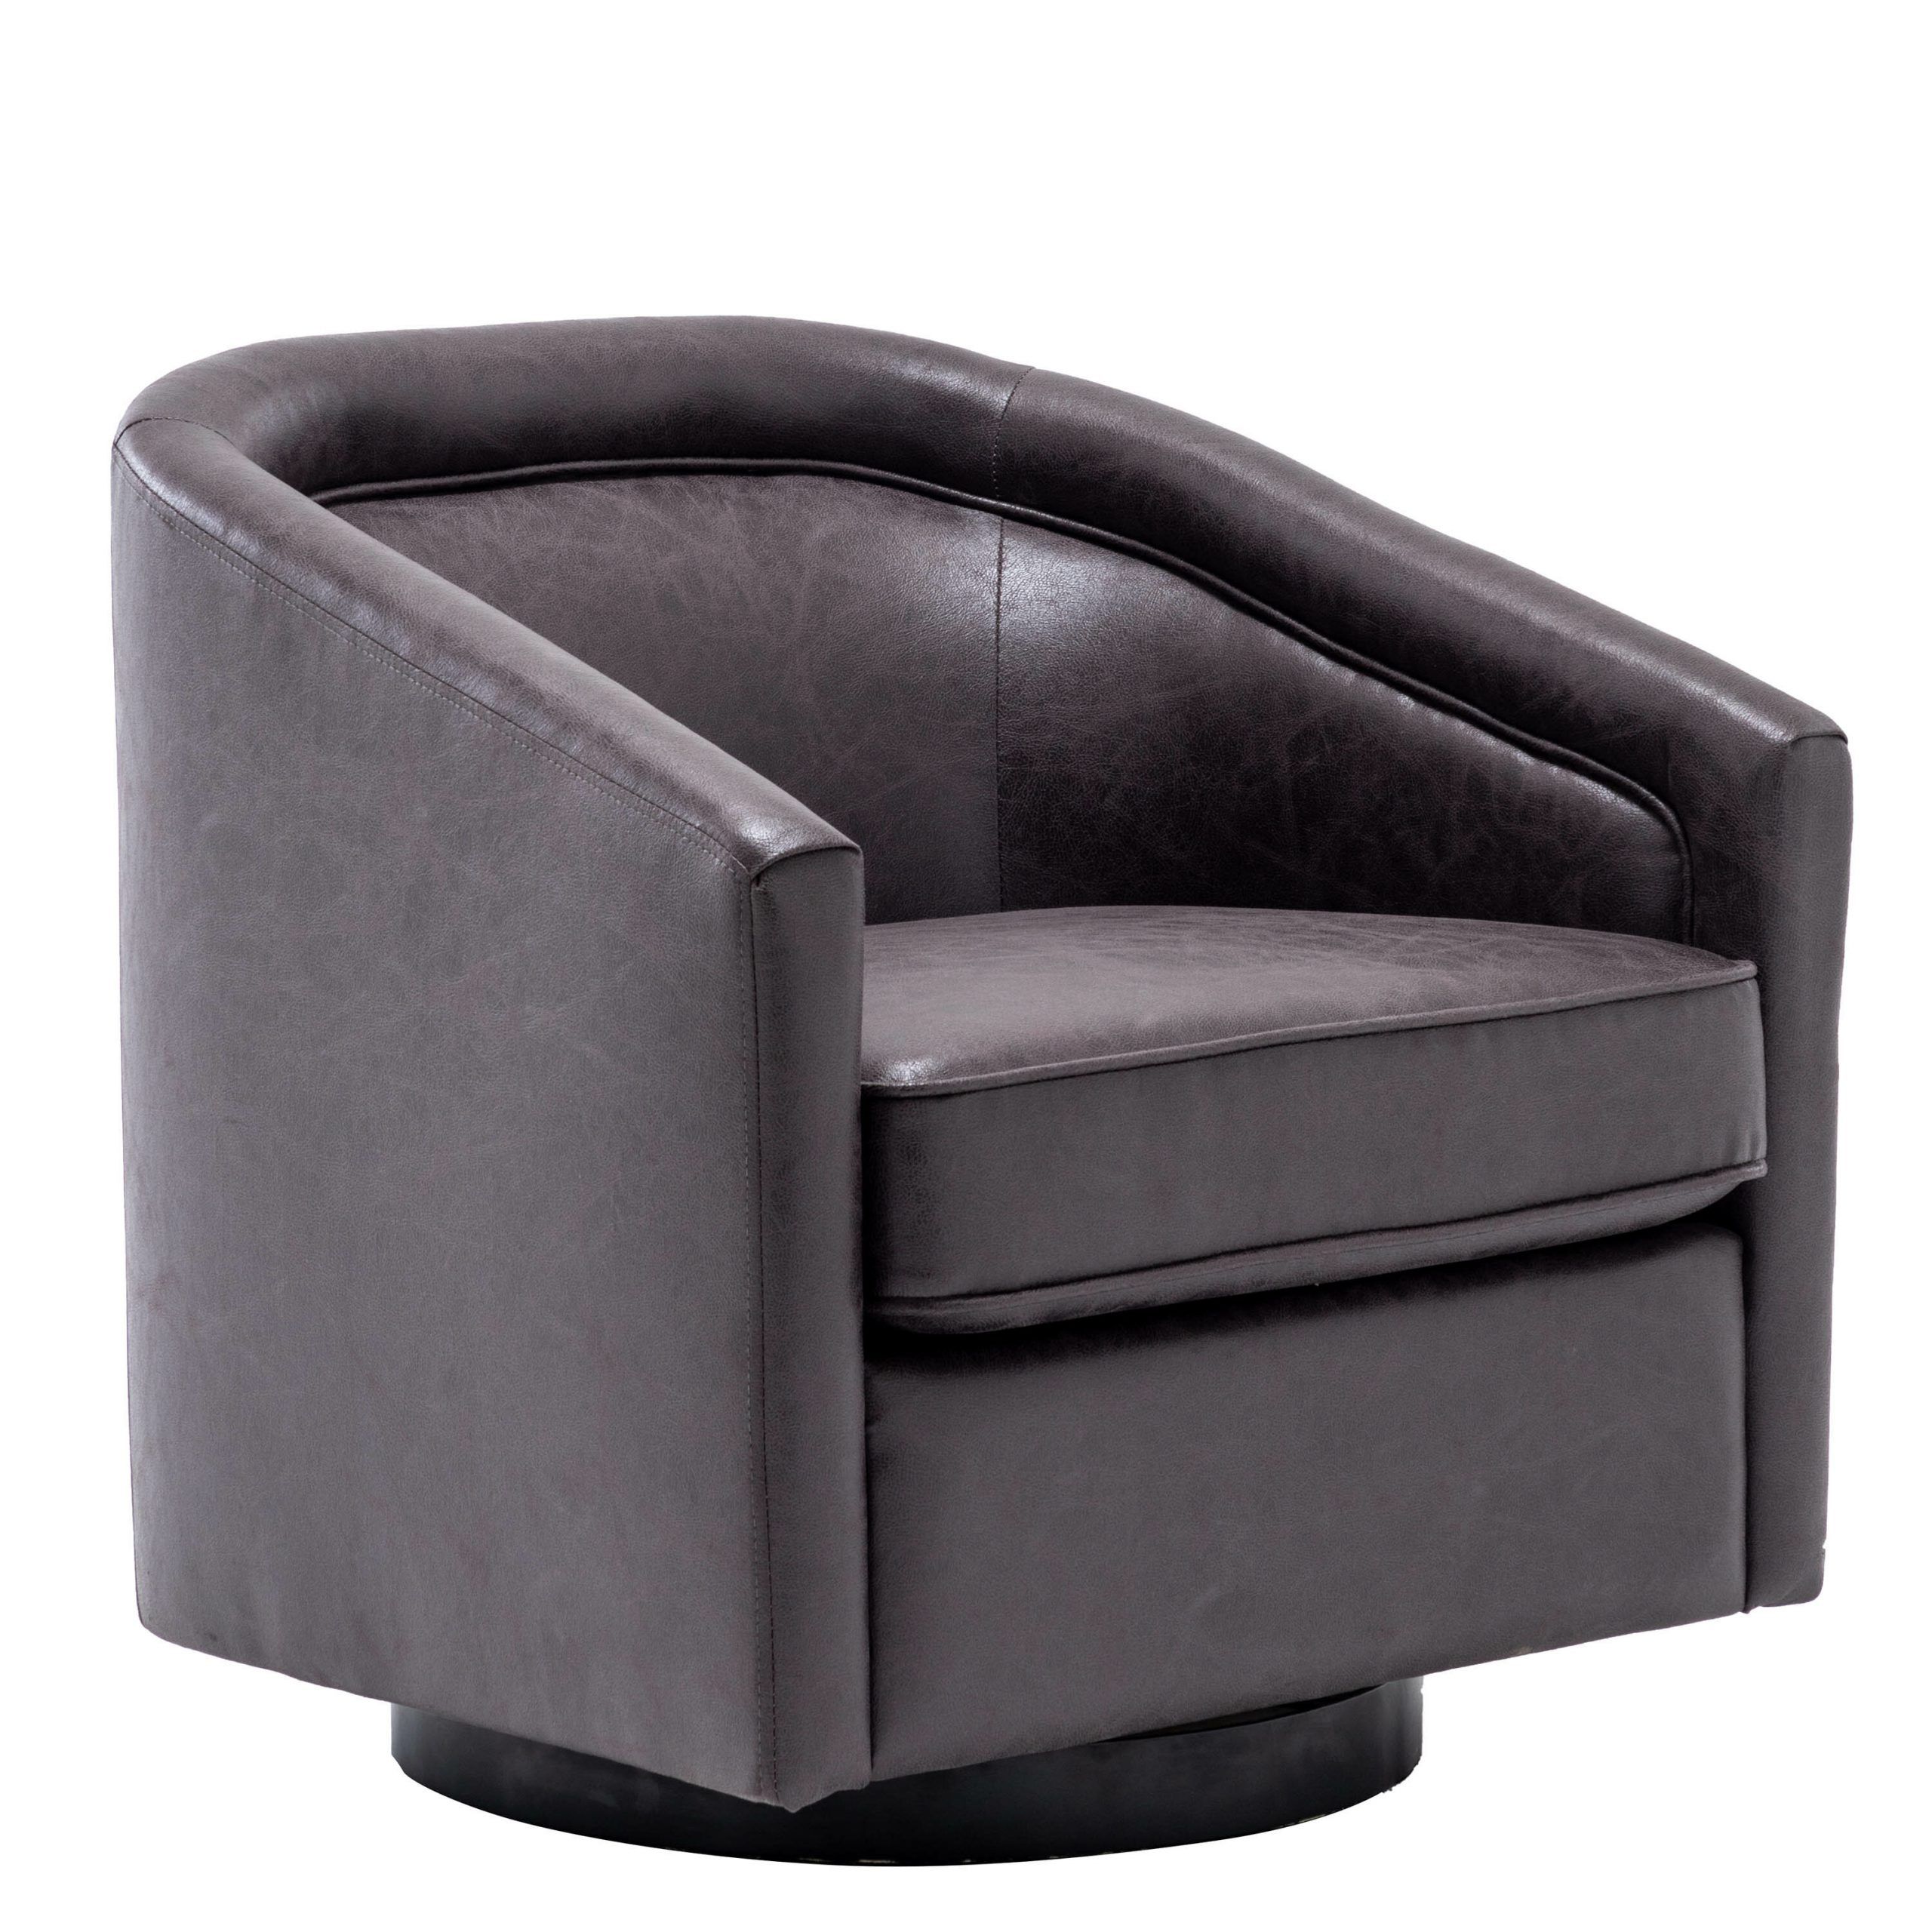 Hazley Barrel Swivel Chair With Hazley Faux Leather Swivel Barrel Chairs (View 2 of 15)